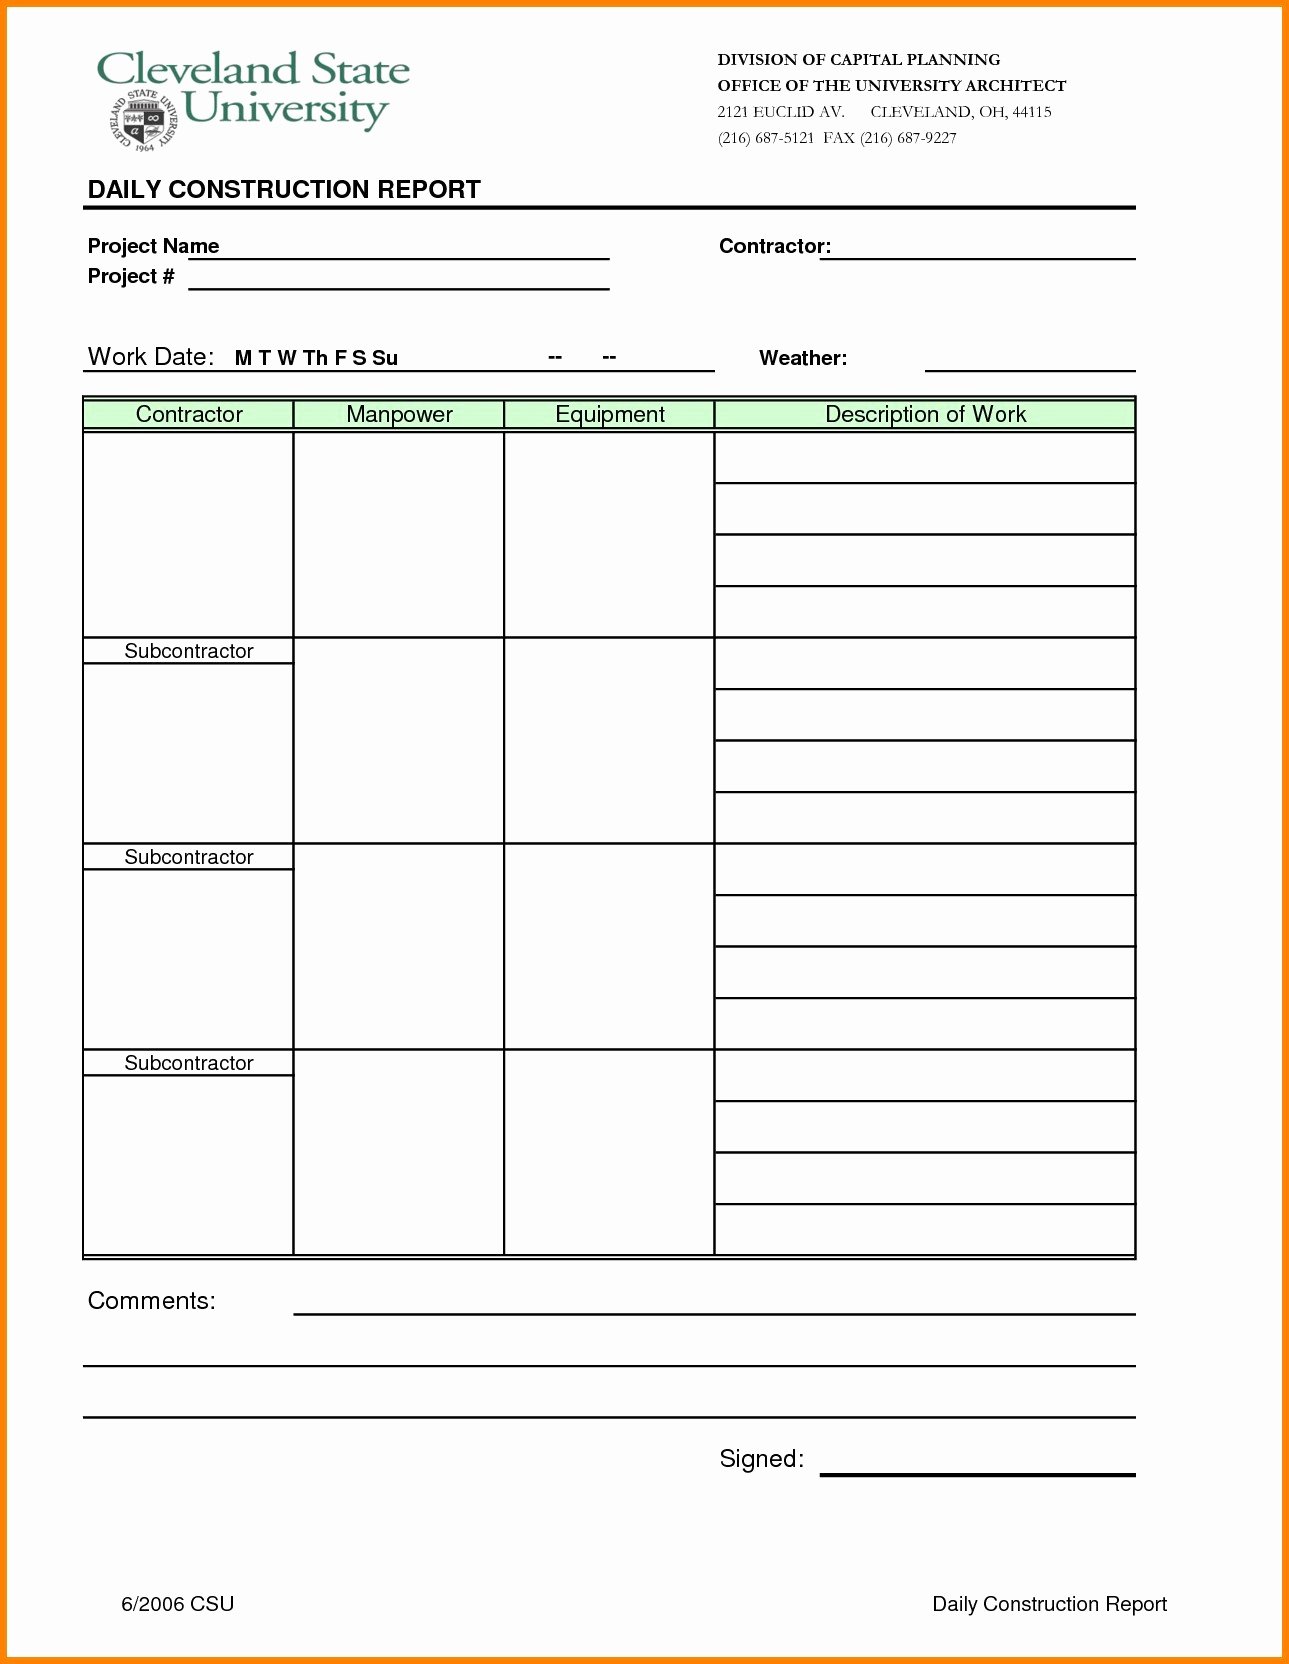 Daily Activity Report Template Elegant Daily Activity Report Template Excel – Free Daily Schedule Templates for Excel Smartsheet